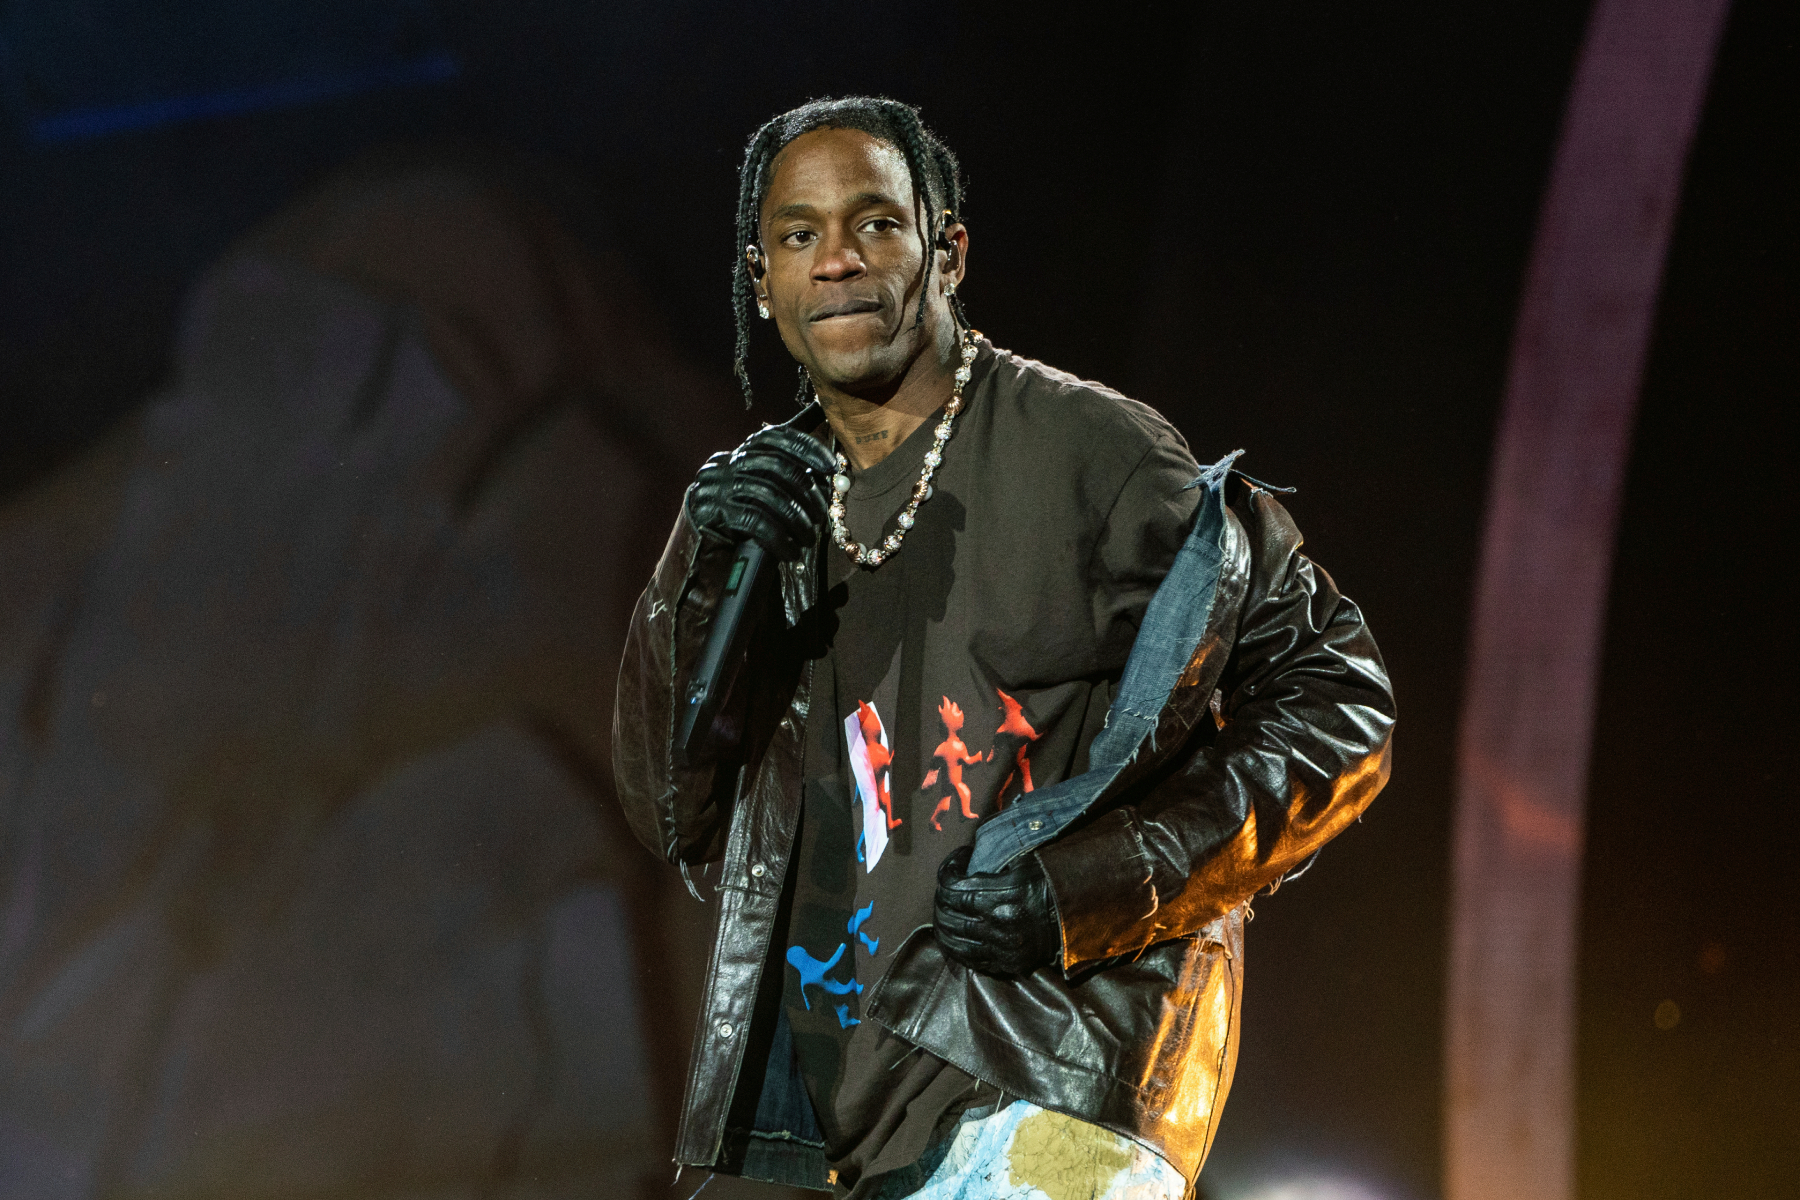 Nike Announces Travis Scott’s Air Max 1 Retraction Following the Astroworld Tragedy